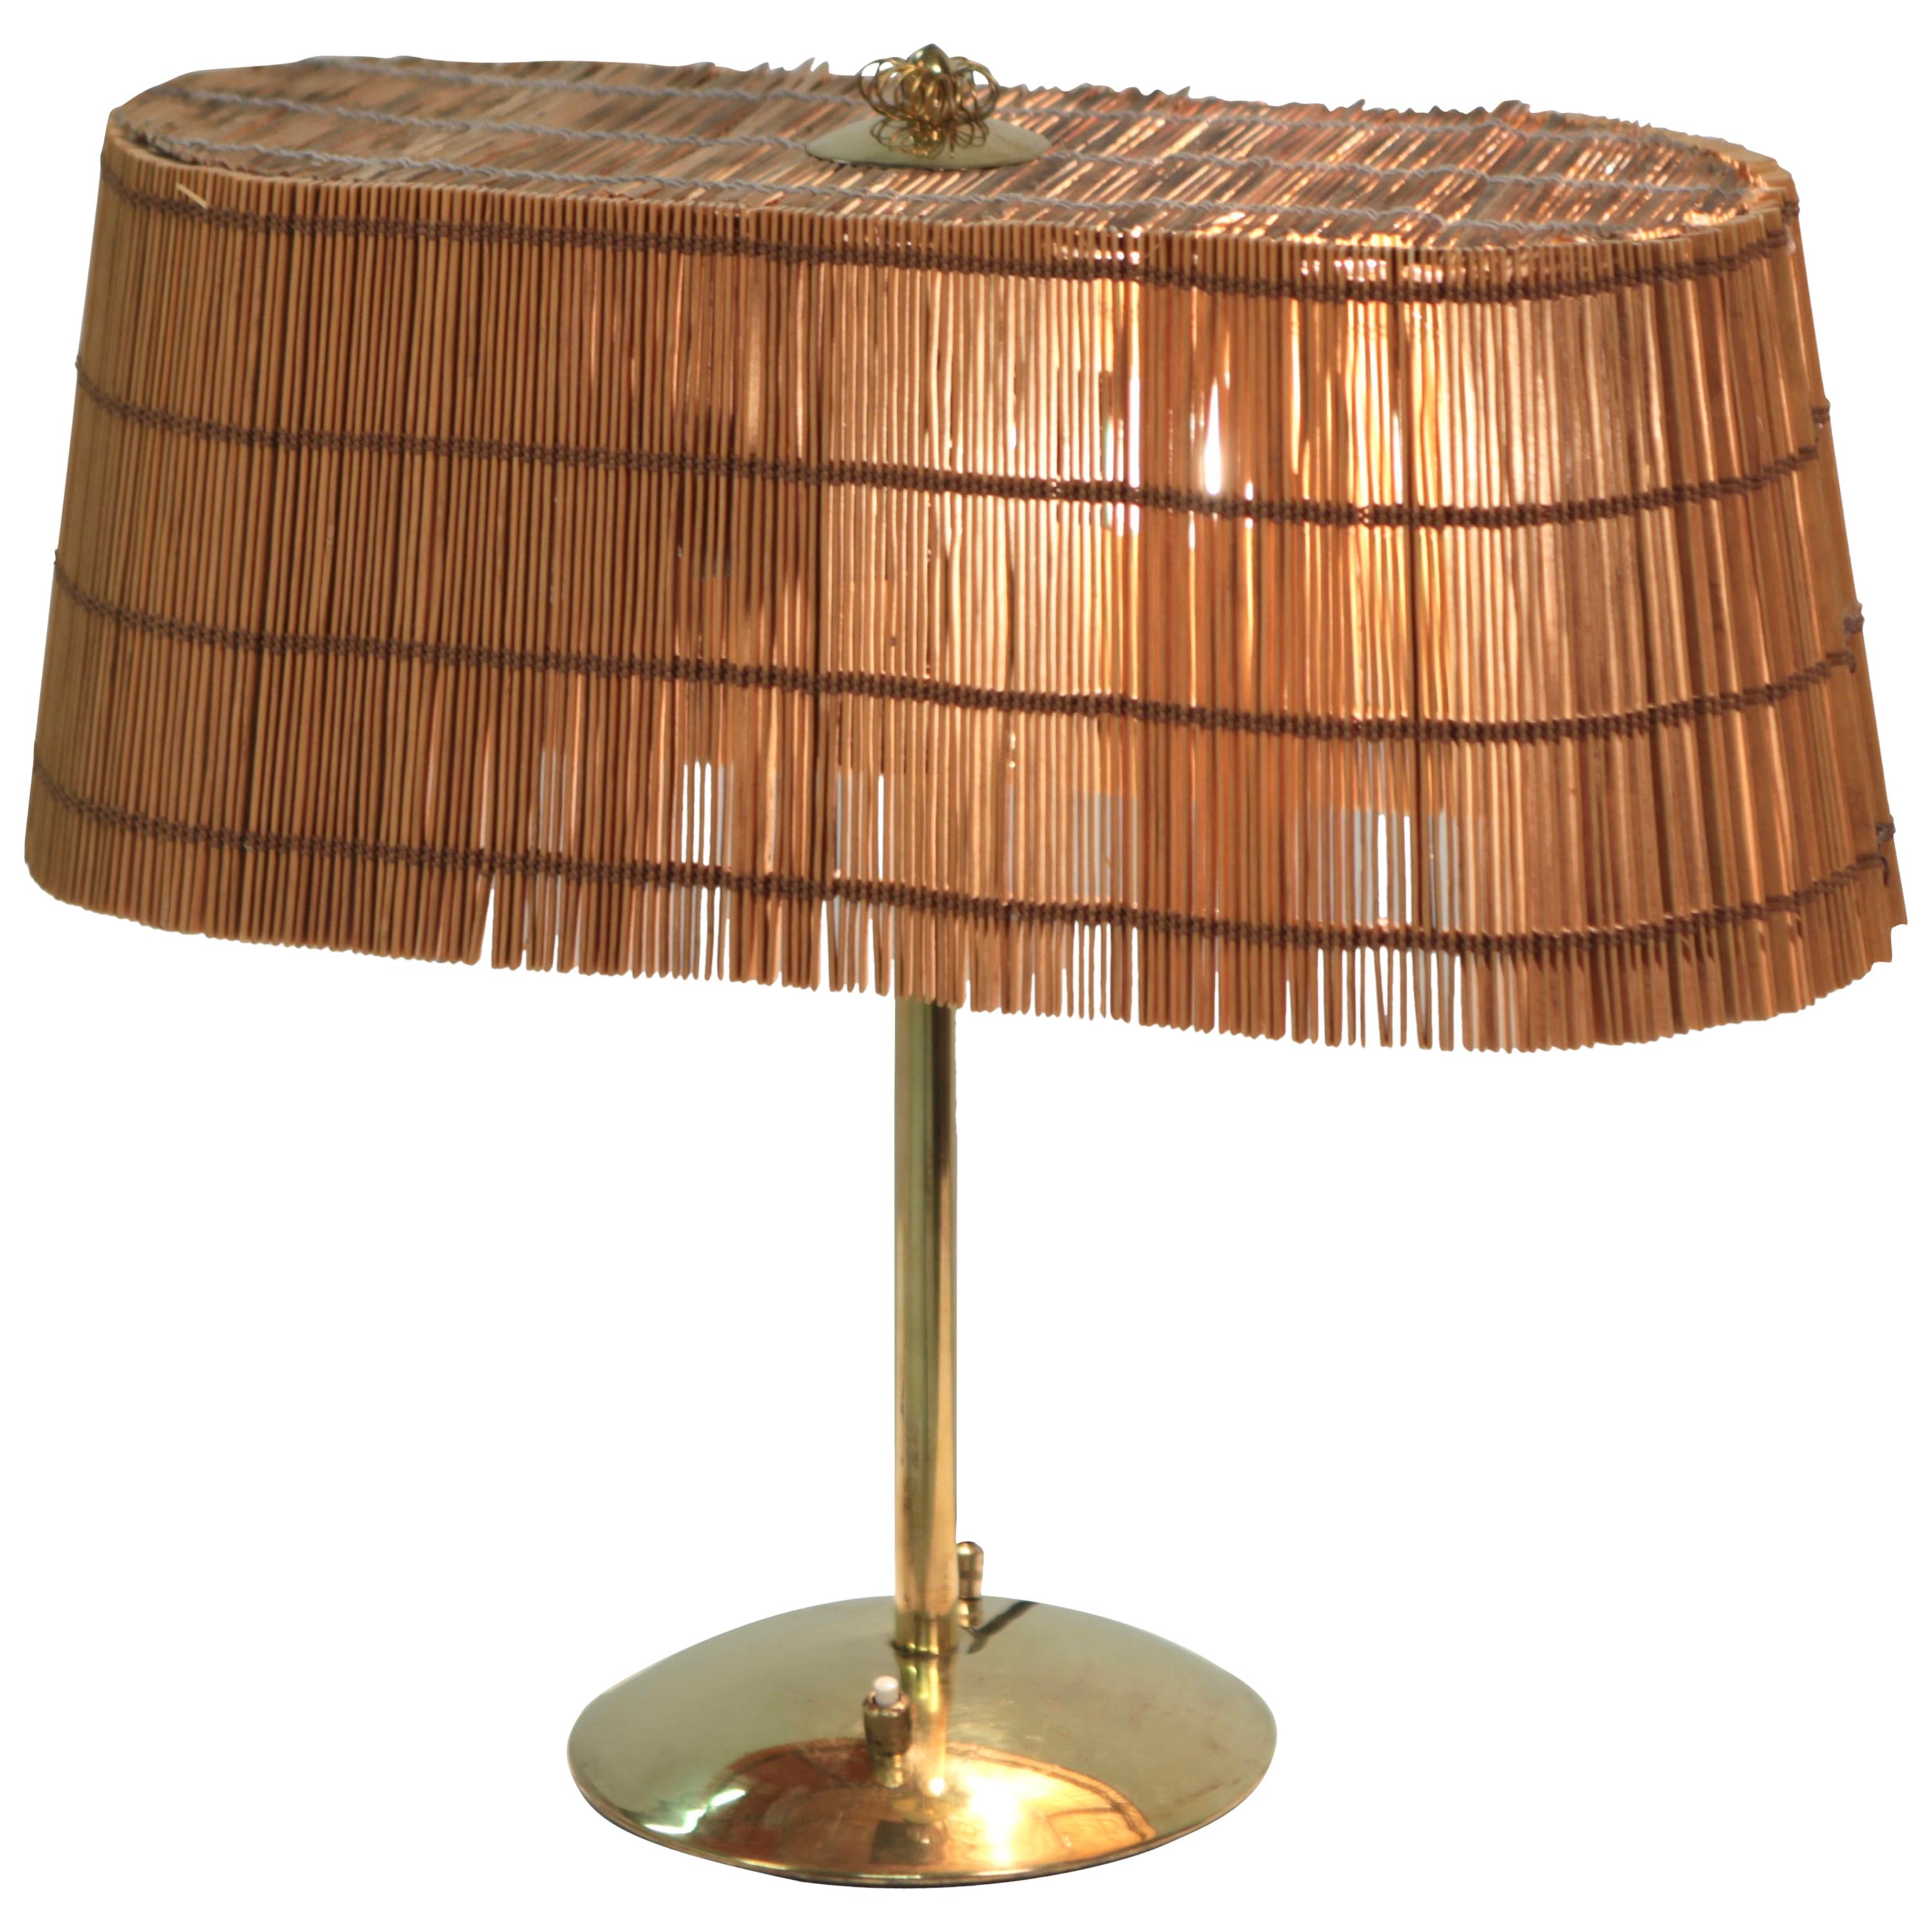 Table Lamp, Brass and Shade Made of Splints, Lasipaino Oy, Finland, 1940s